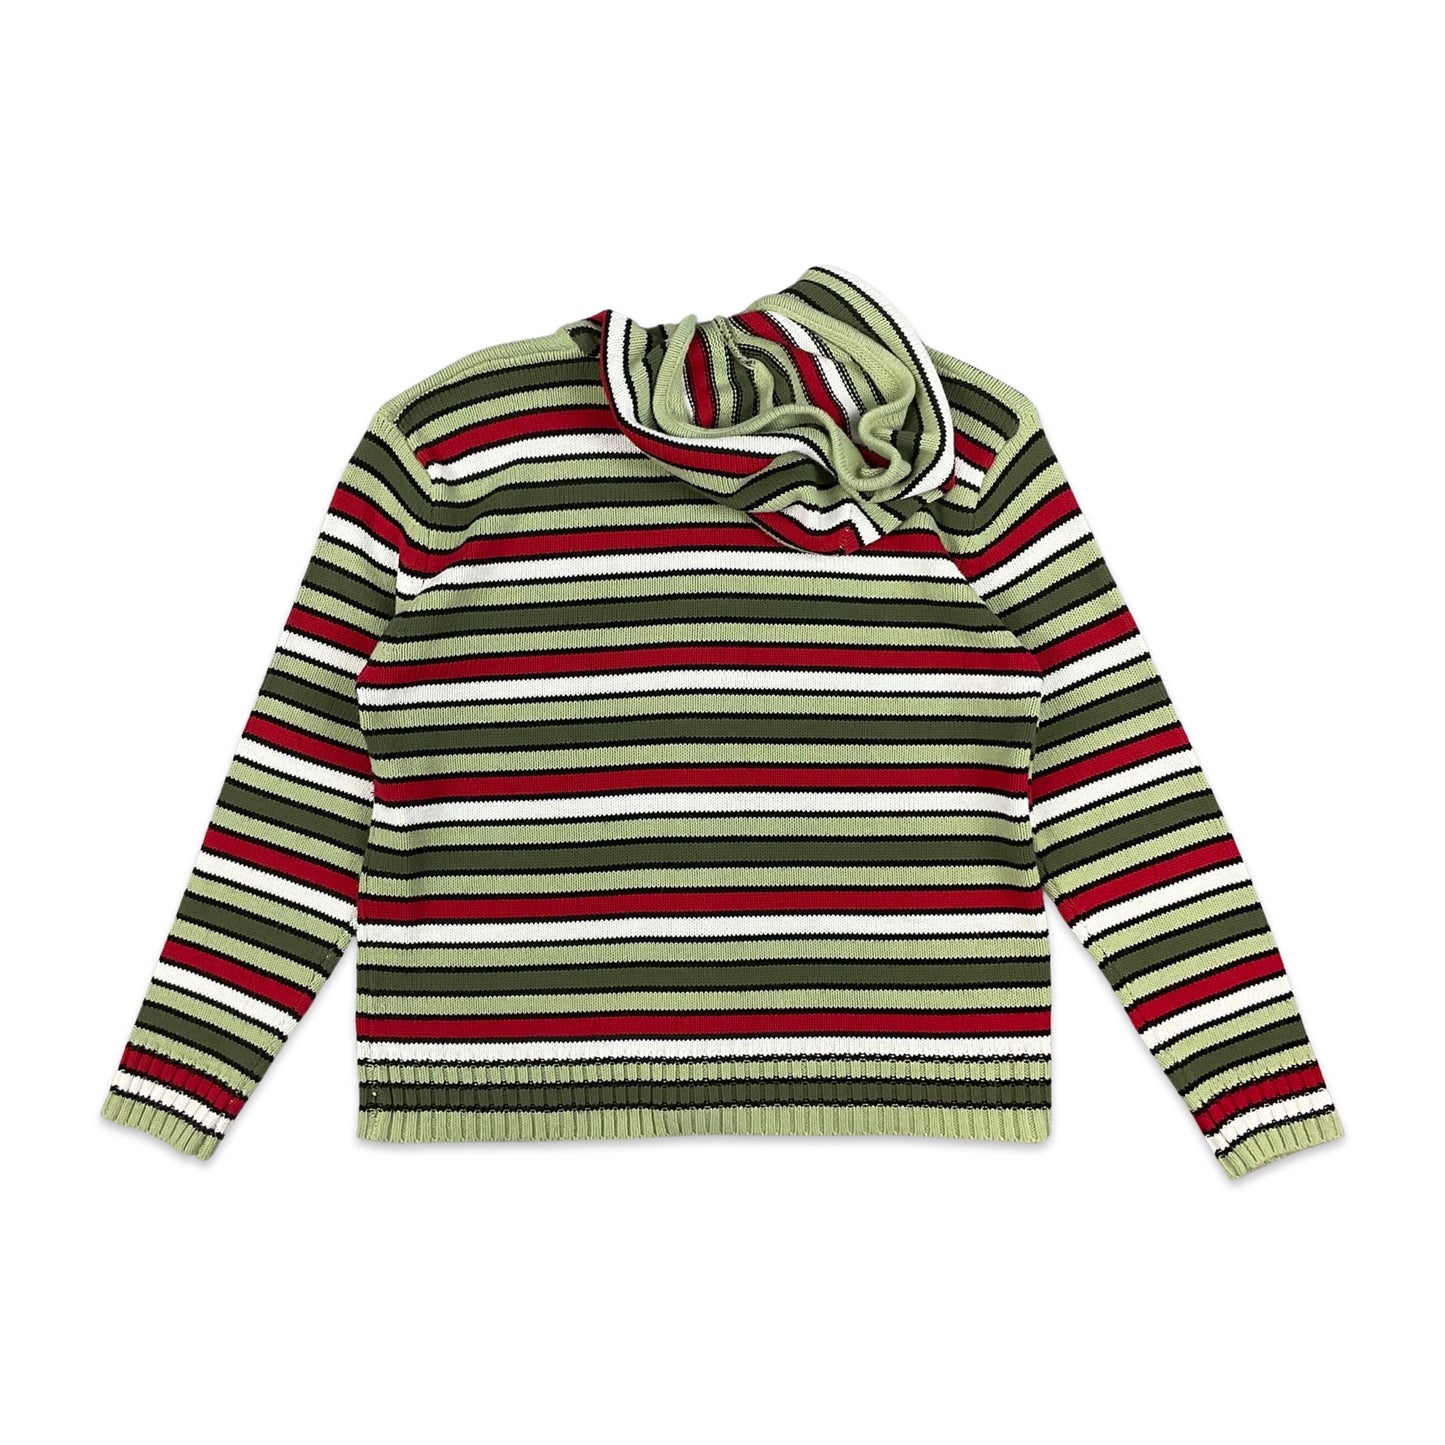 Vintage Green Striped Hooded Zip Cardigan Red White 14 16